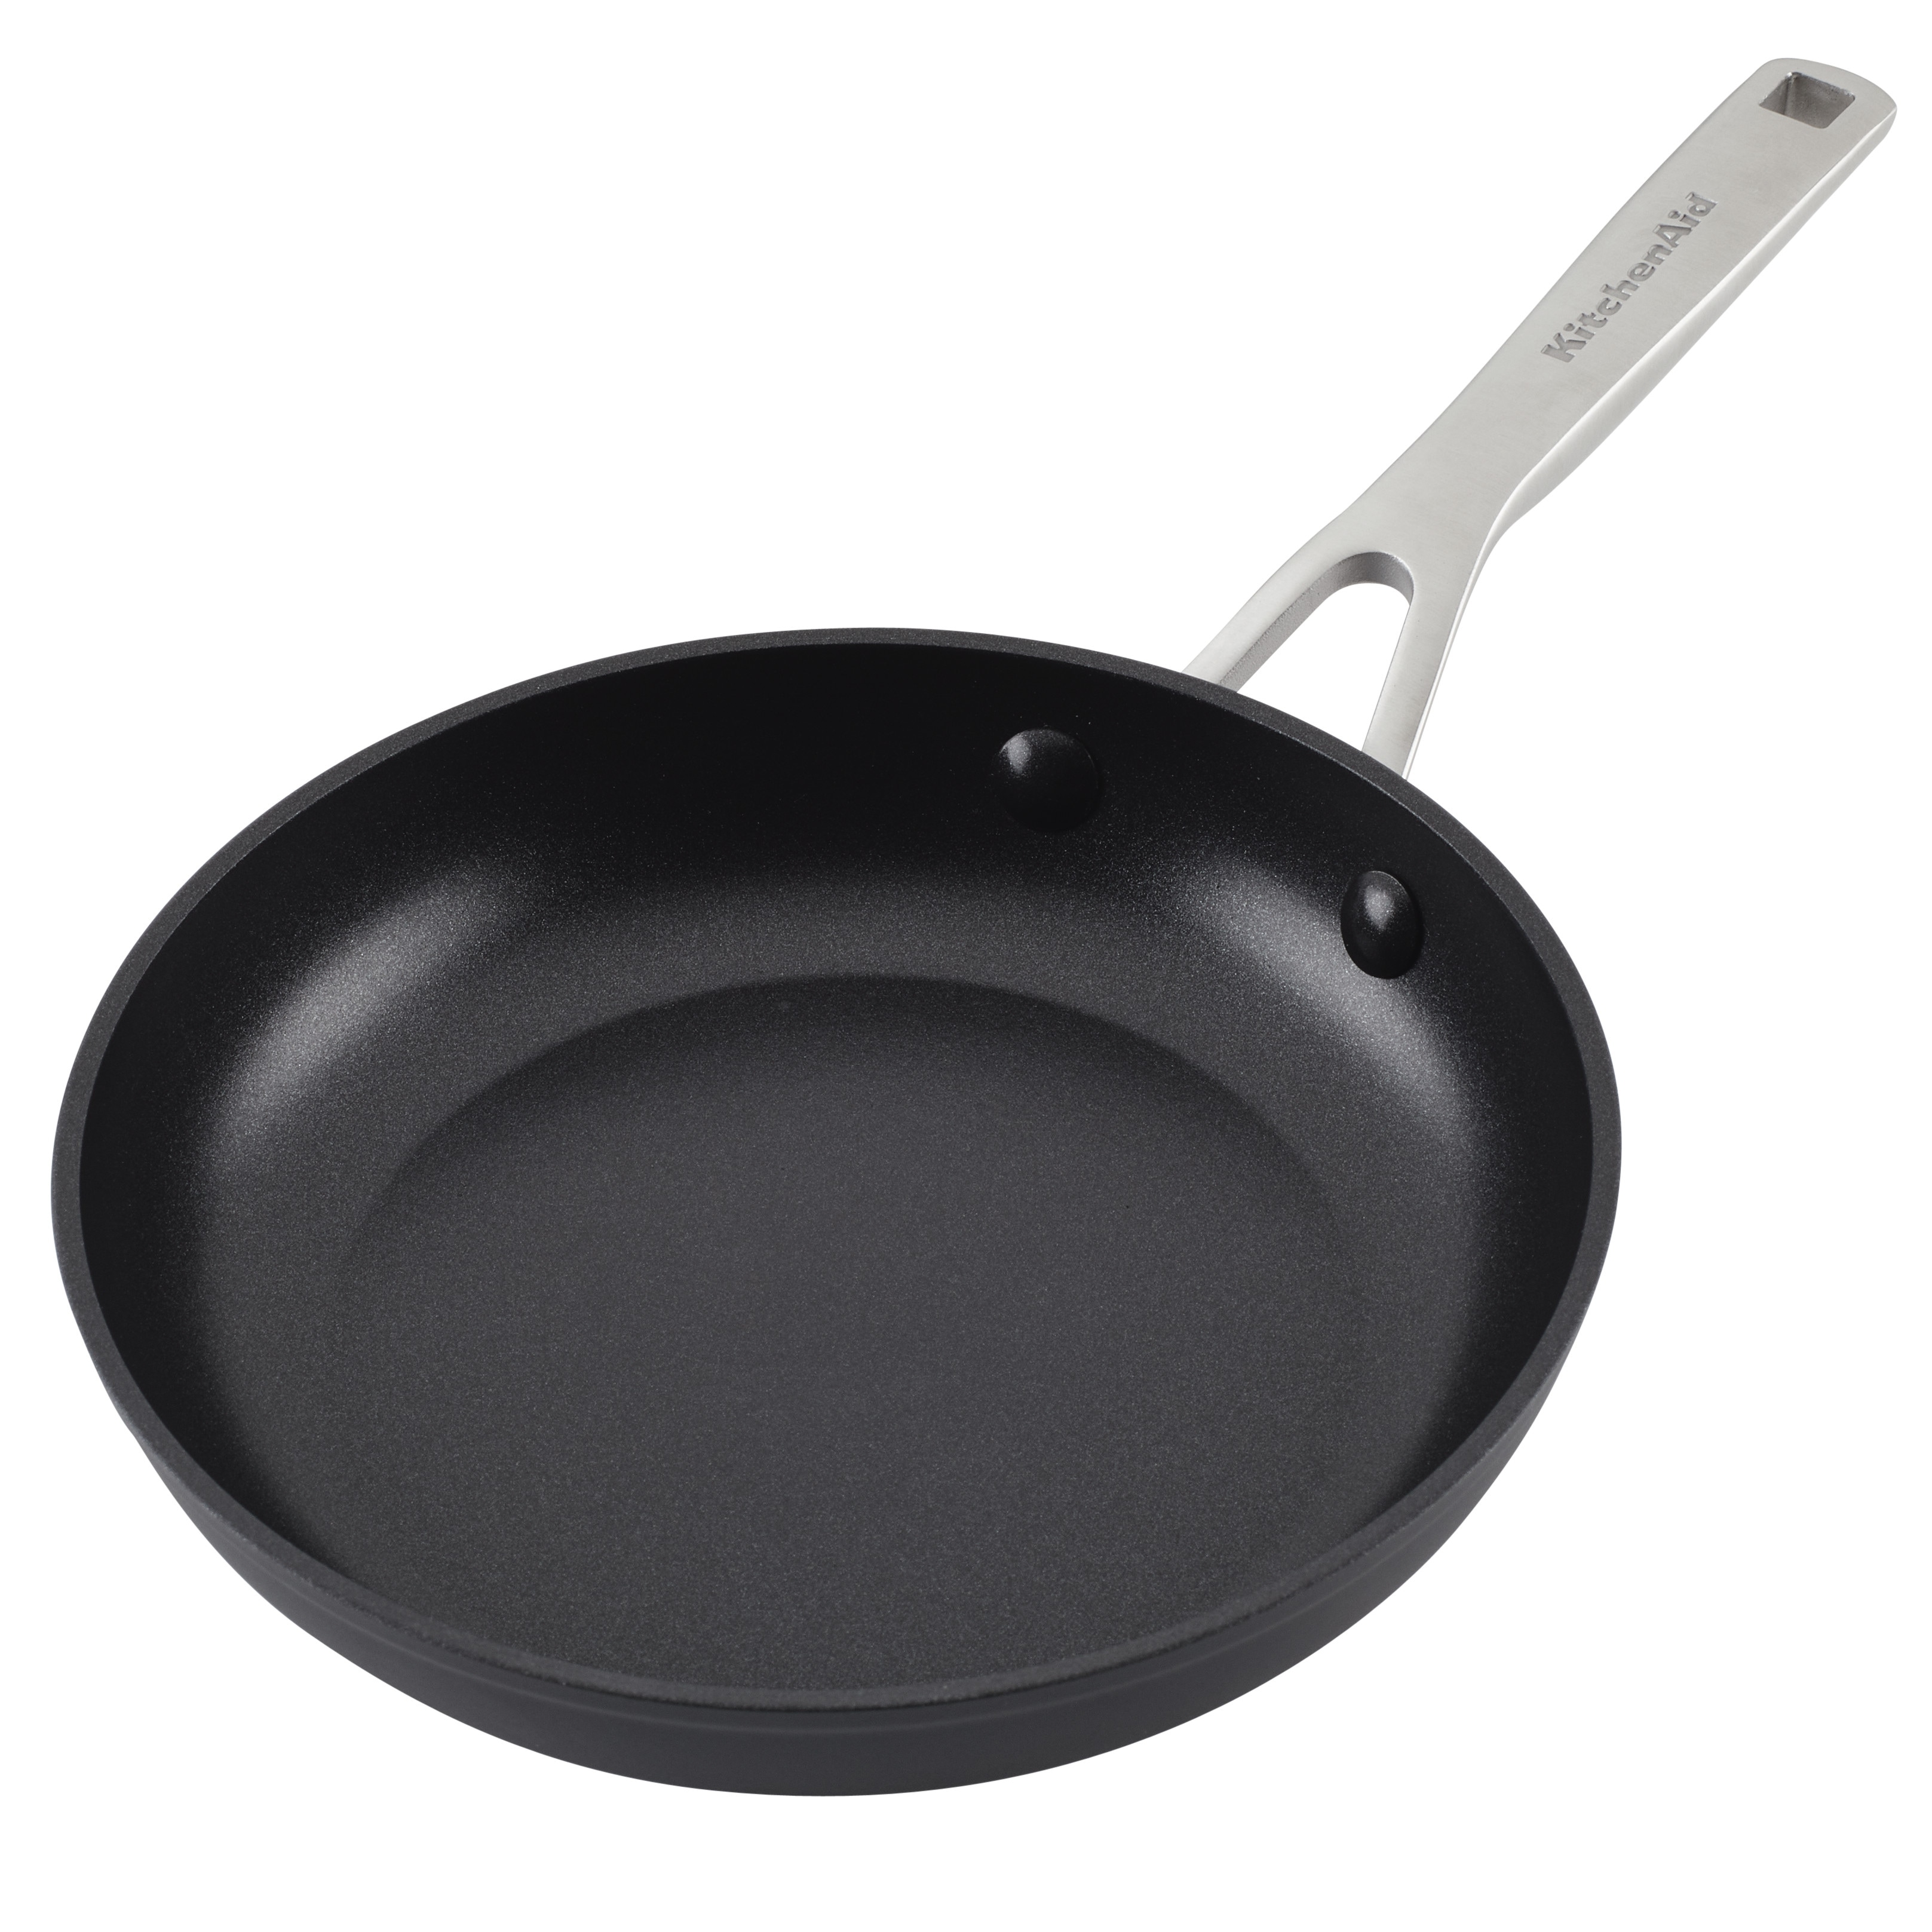 https://ak1.ostkcdn.com/images/products/is/images/direct/489ea0645dd1fe41749a69656c8e3e5470de7b39/KitchenAid-Hard-Anodized-Induction-Frying-Pan-with-Lid%2C-10-Inch%2C-Matte-Black.jpg